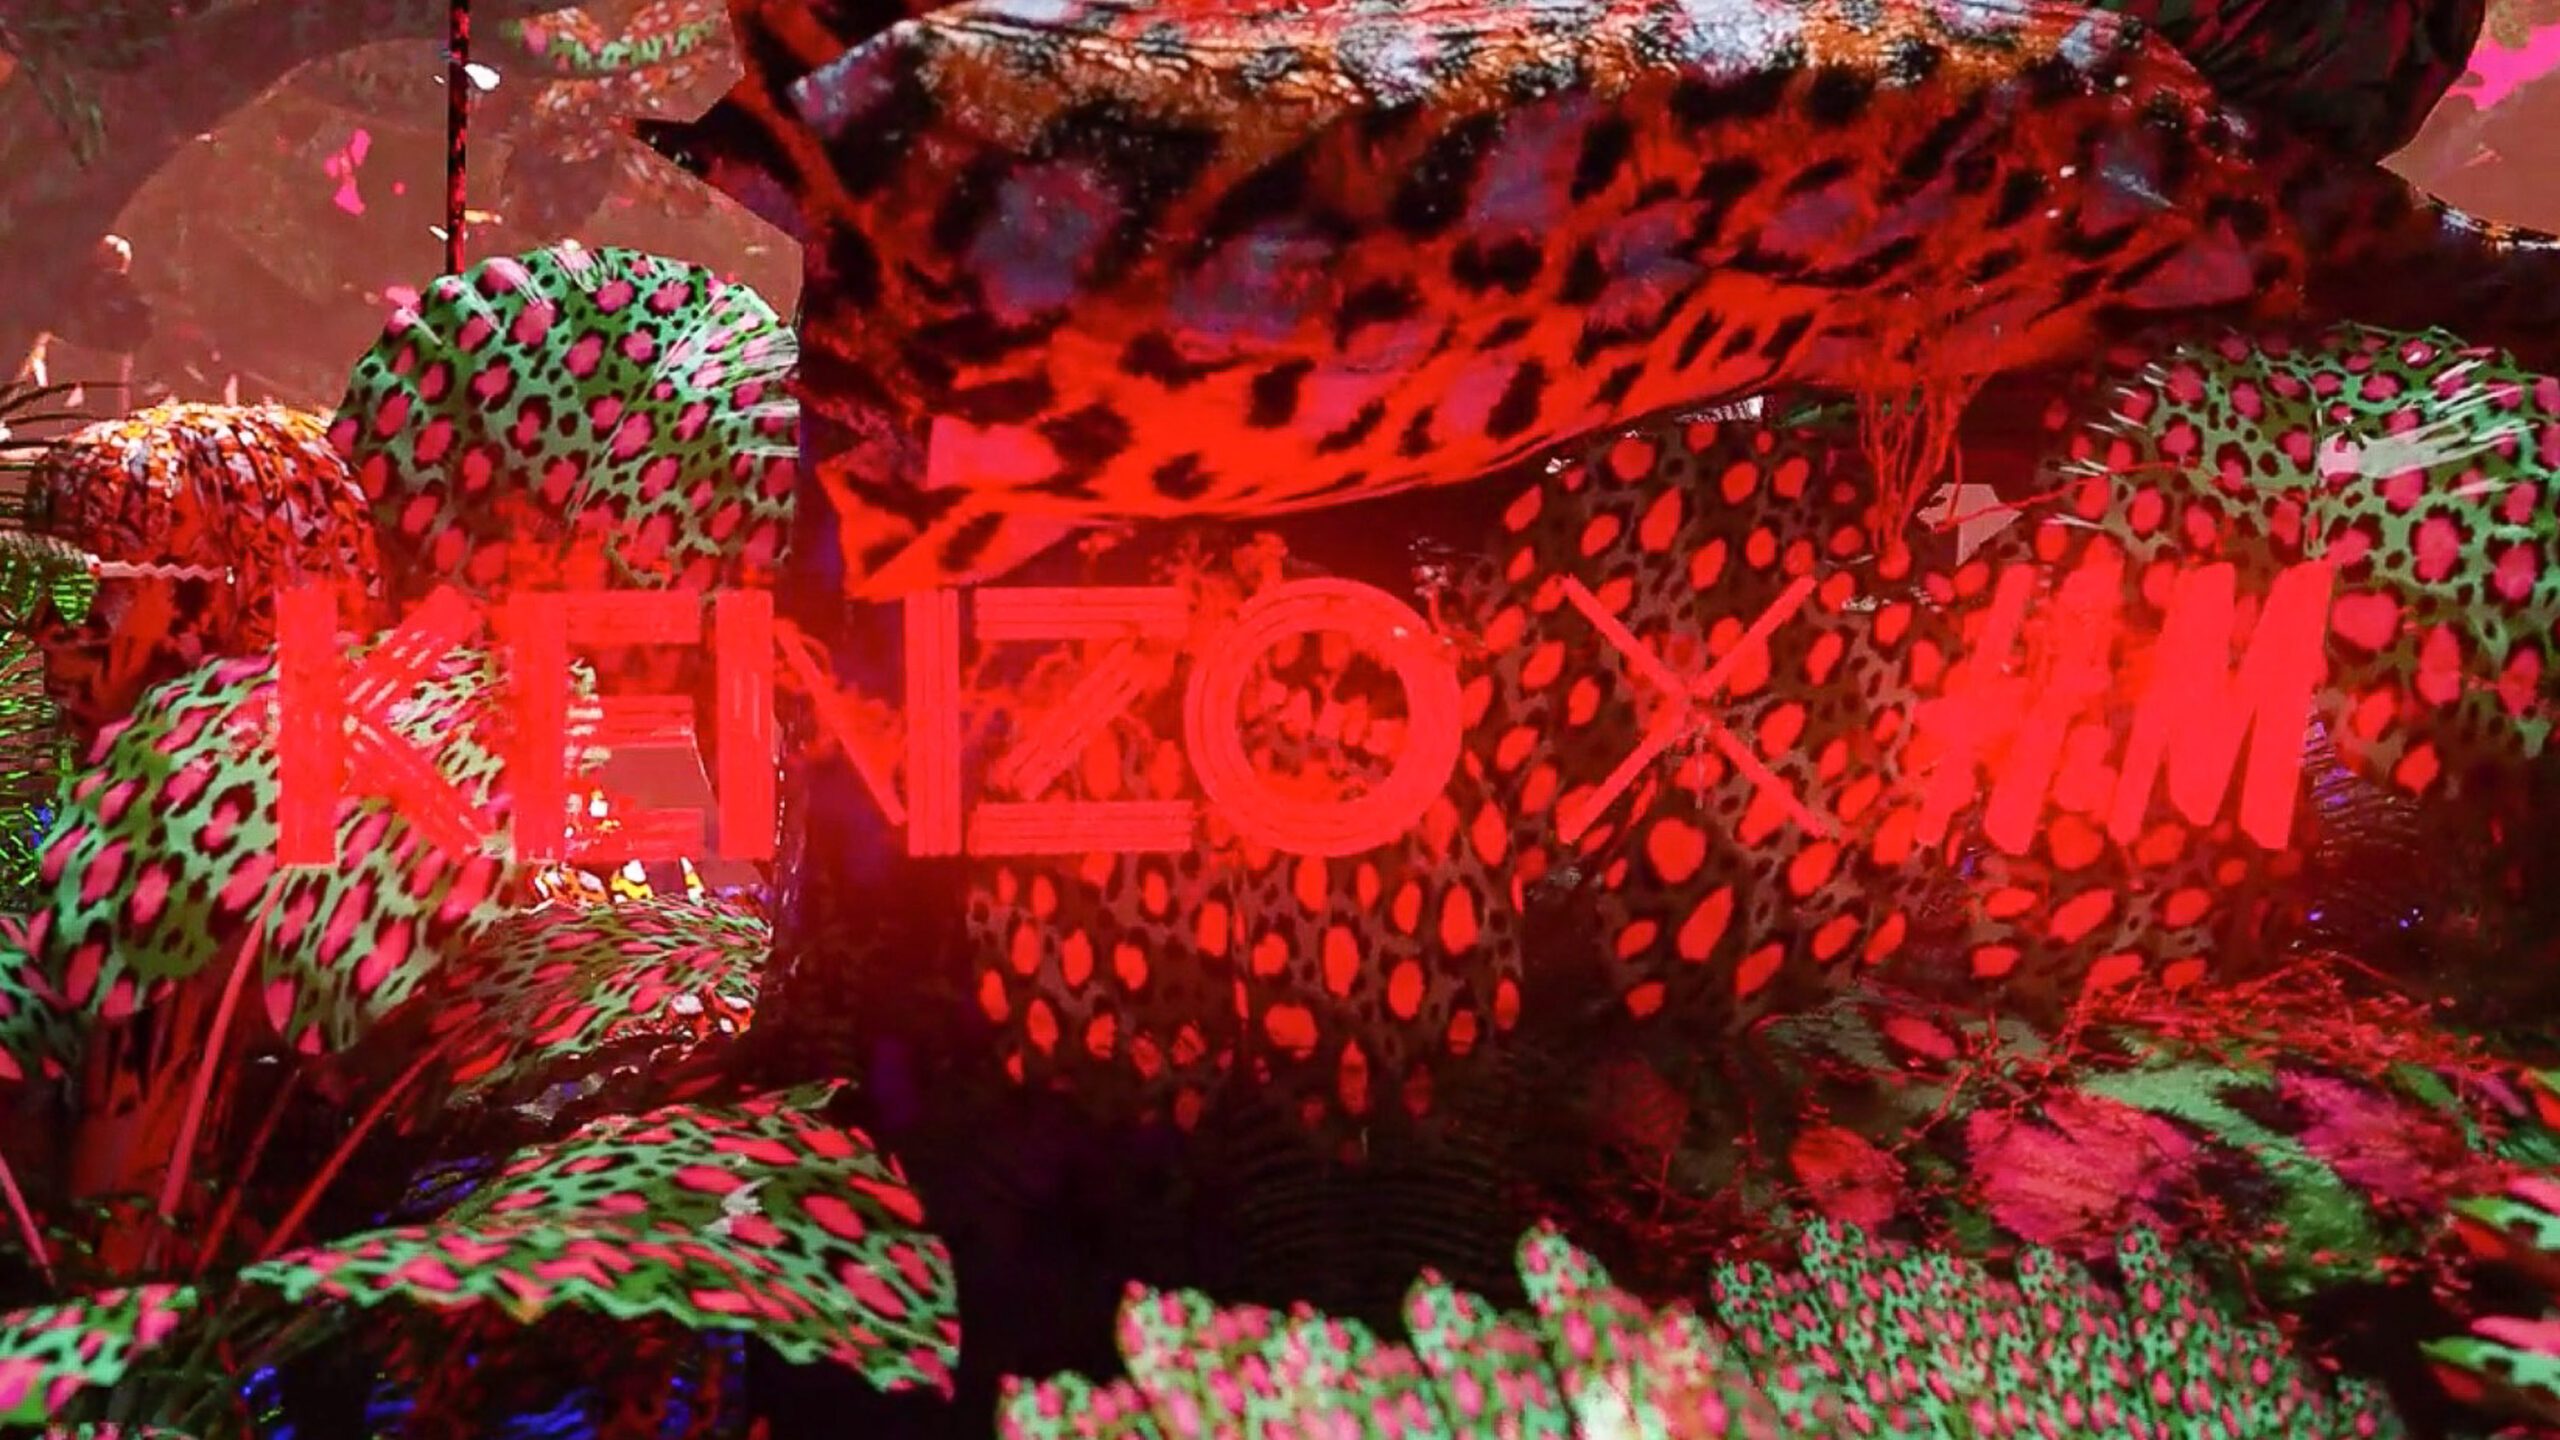 Kenzo x H&M is coming our way